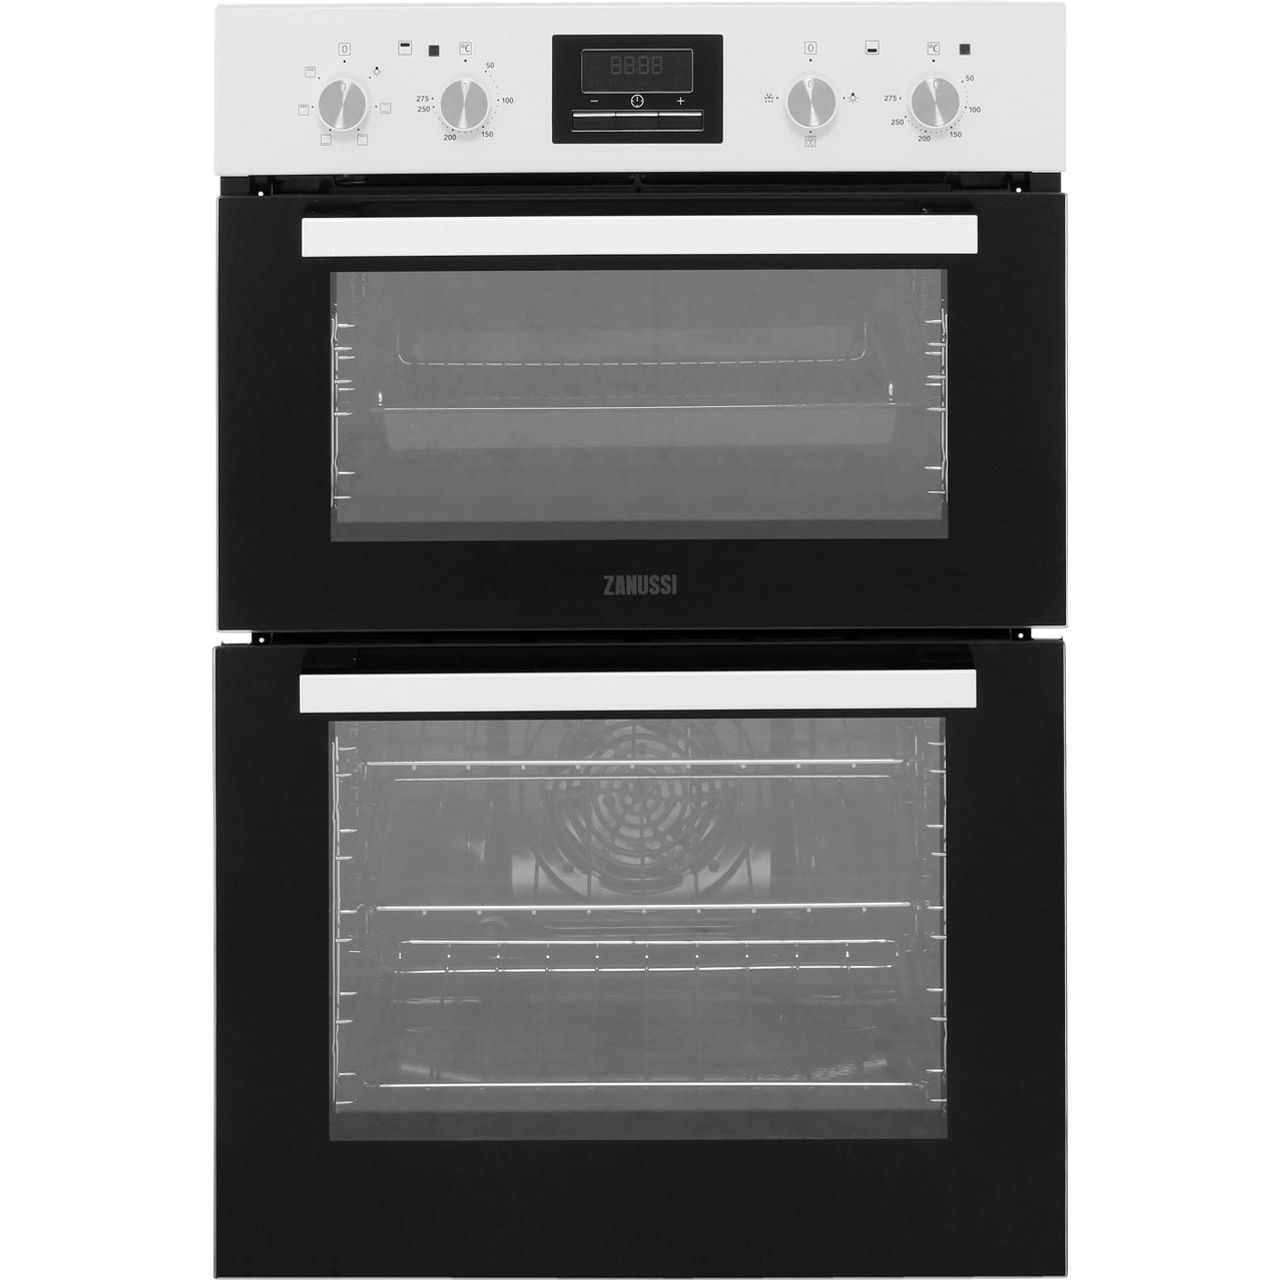 Zanussi ZOD35661WK Built In Double Oven Review